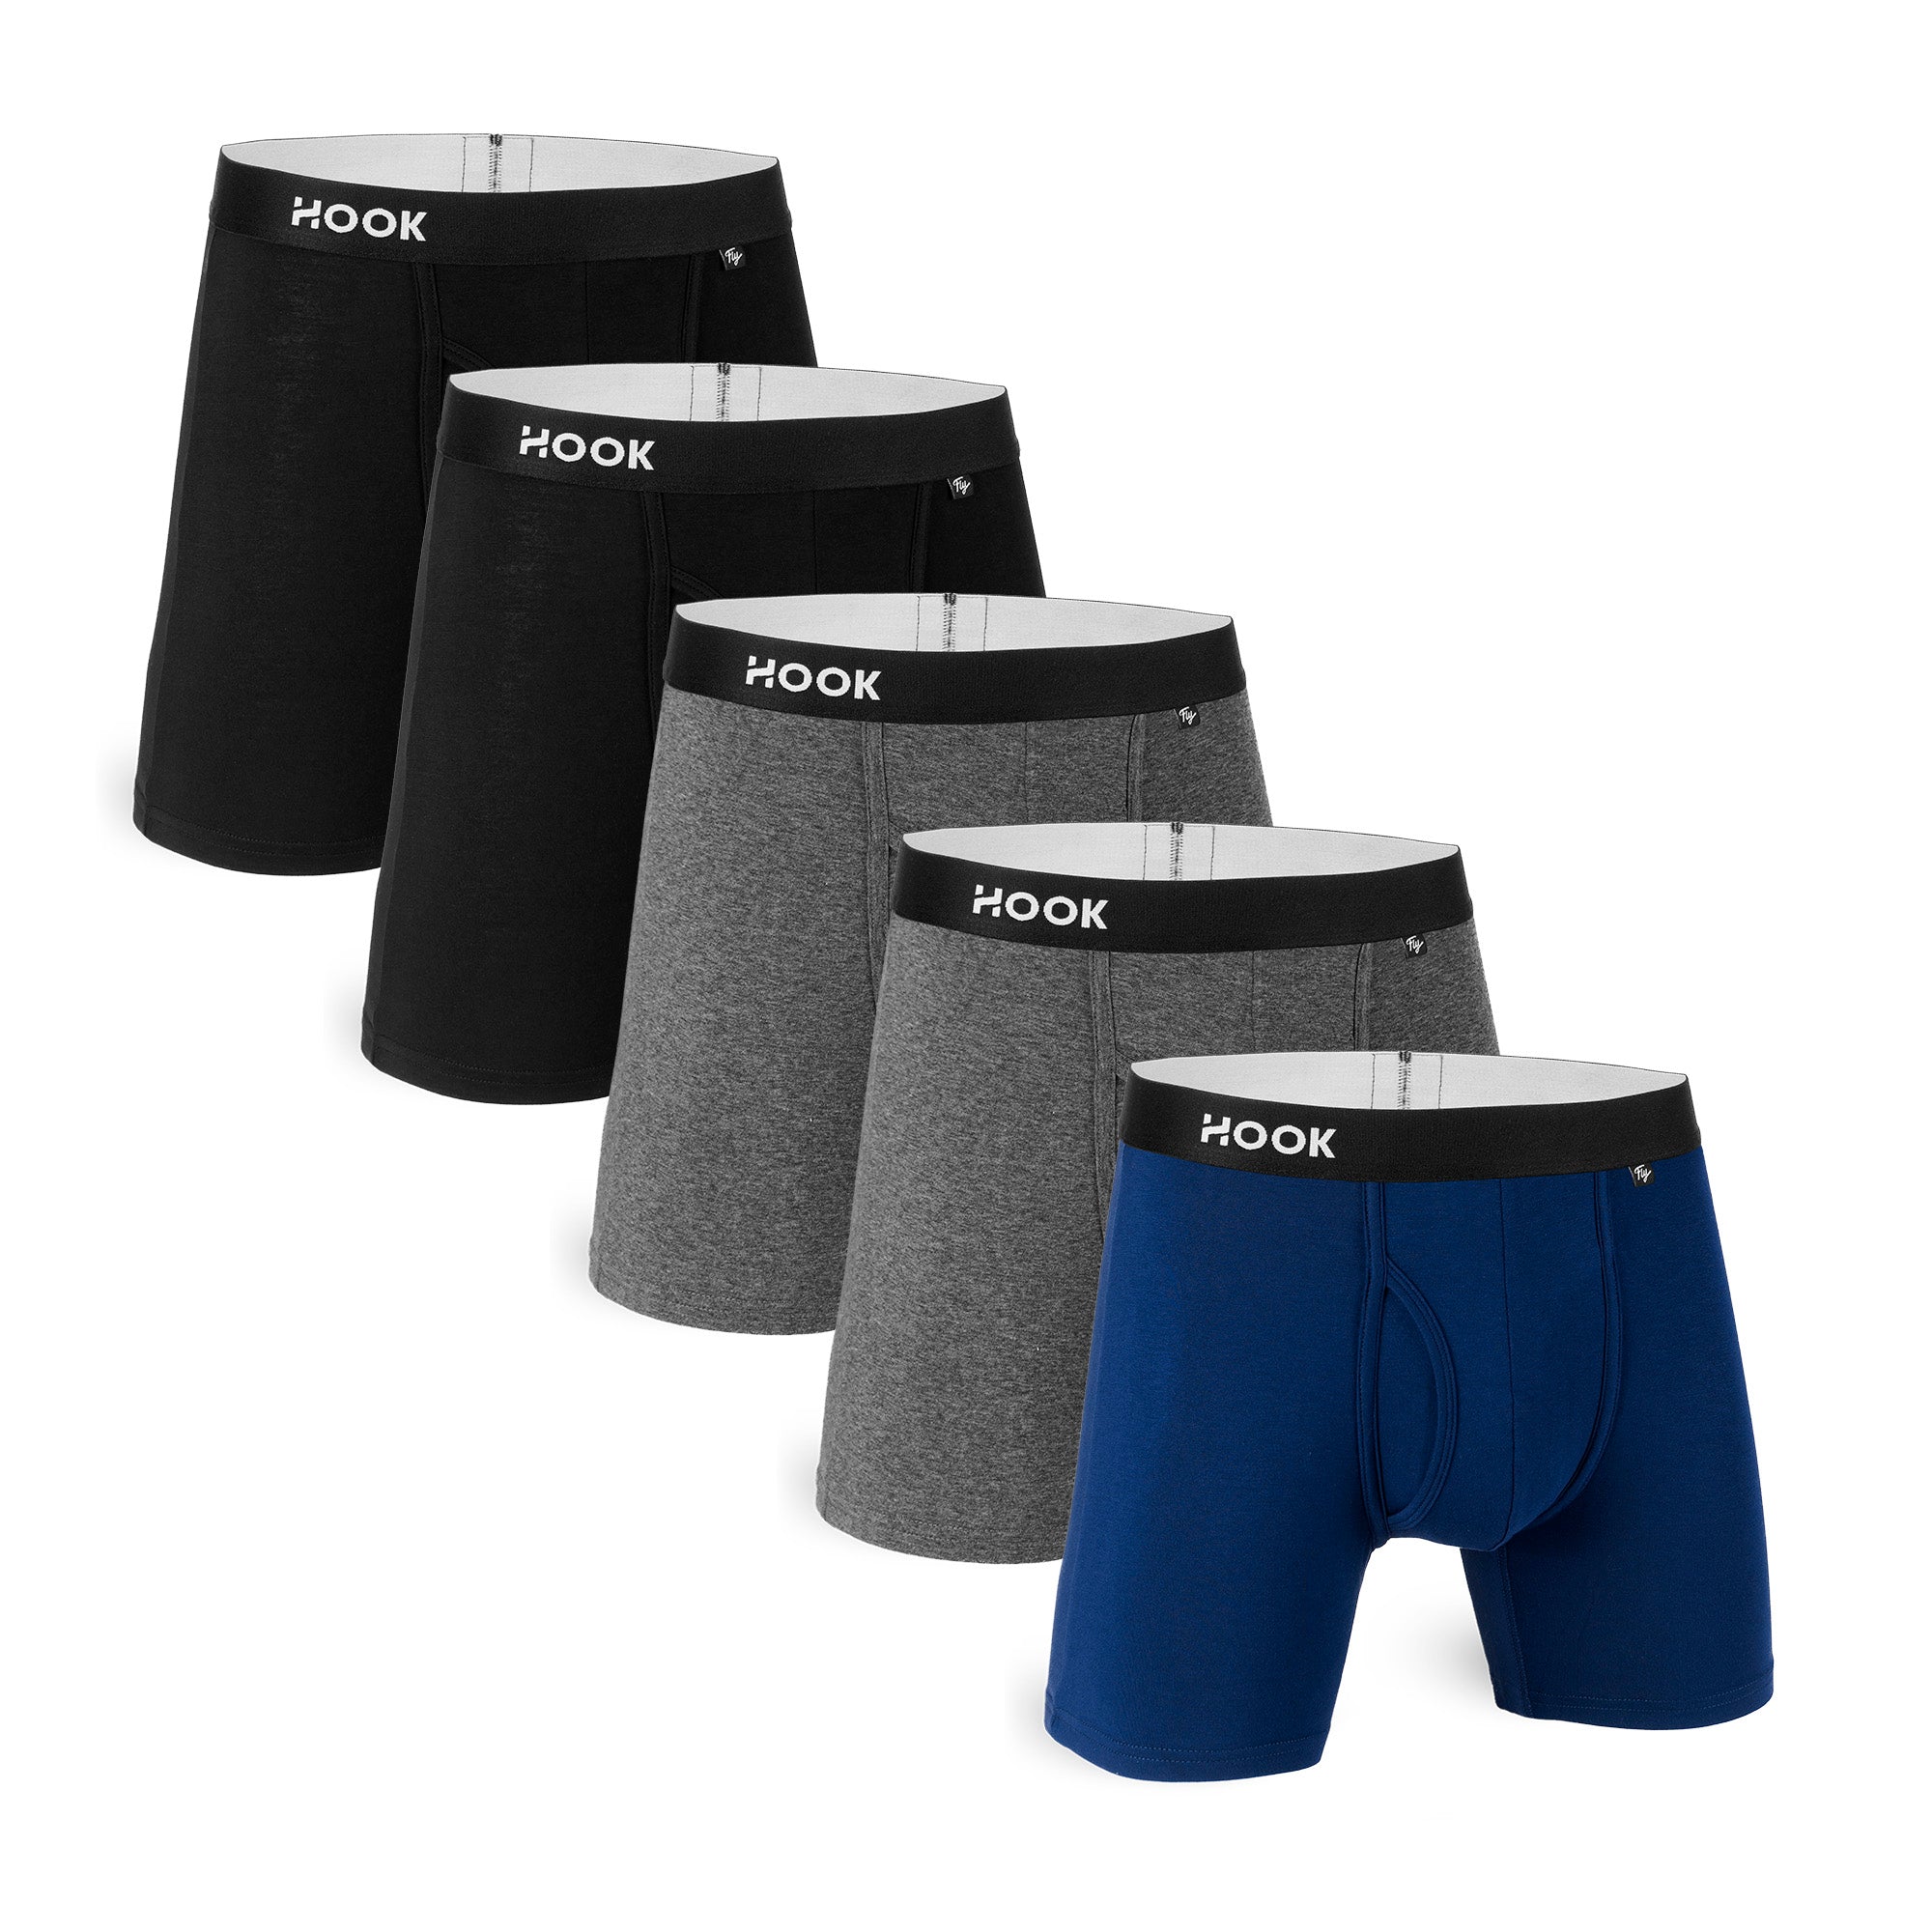 Fly Boxer Brief : Black, Navy, Grey 5 Pack